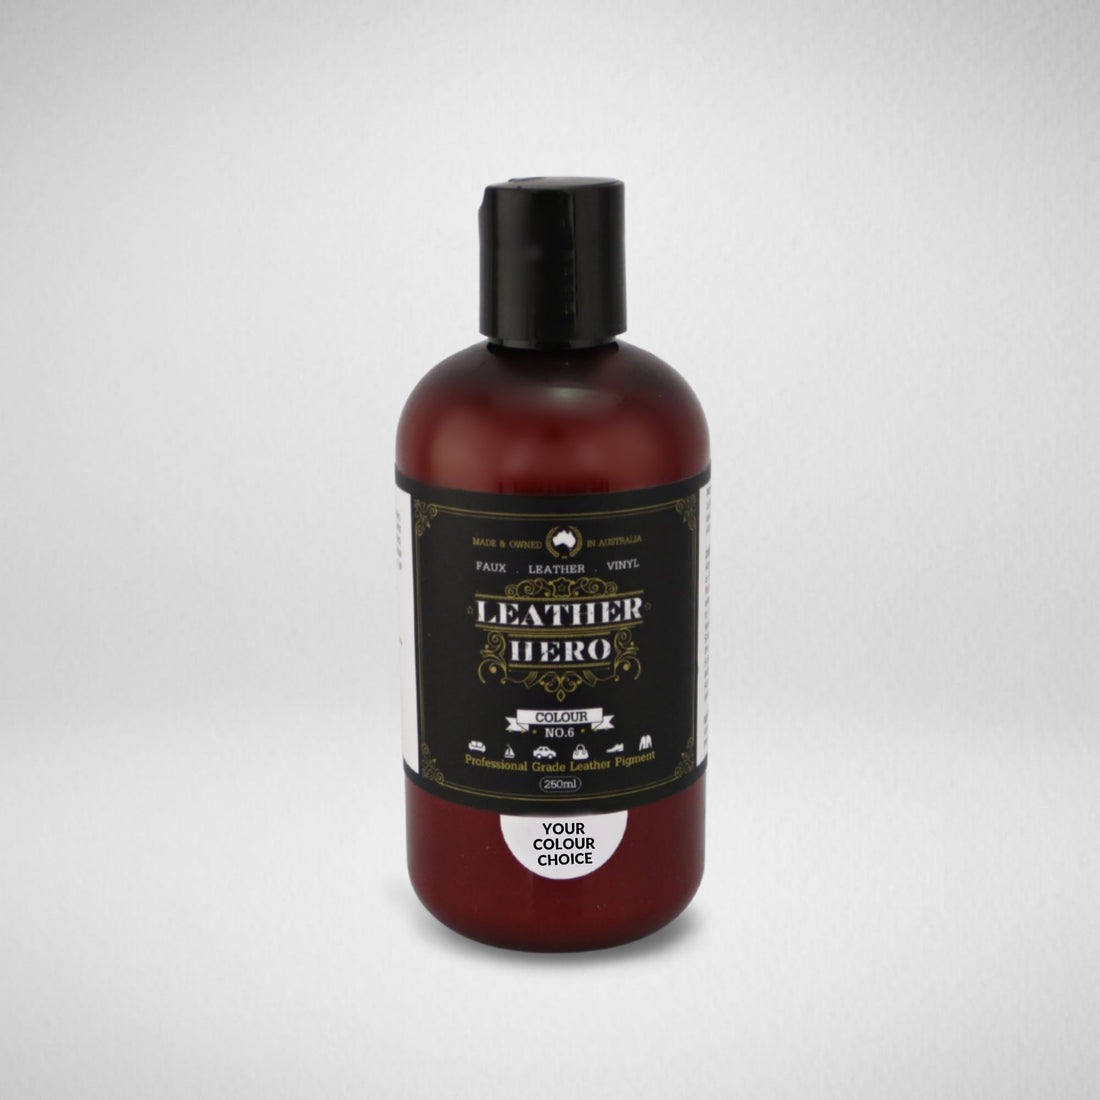 Leather Paint - Yellow Leather Repair & Recolouring Leather Hero Australia